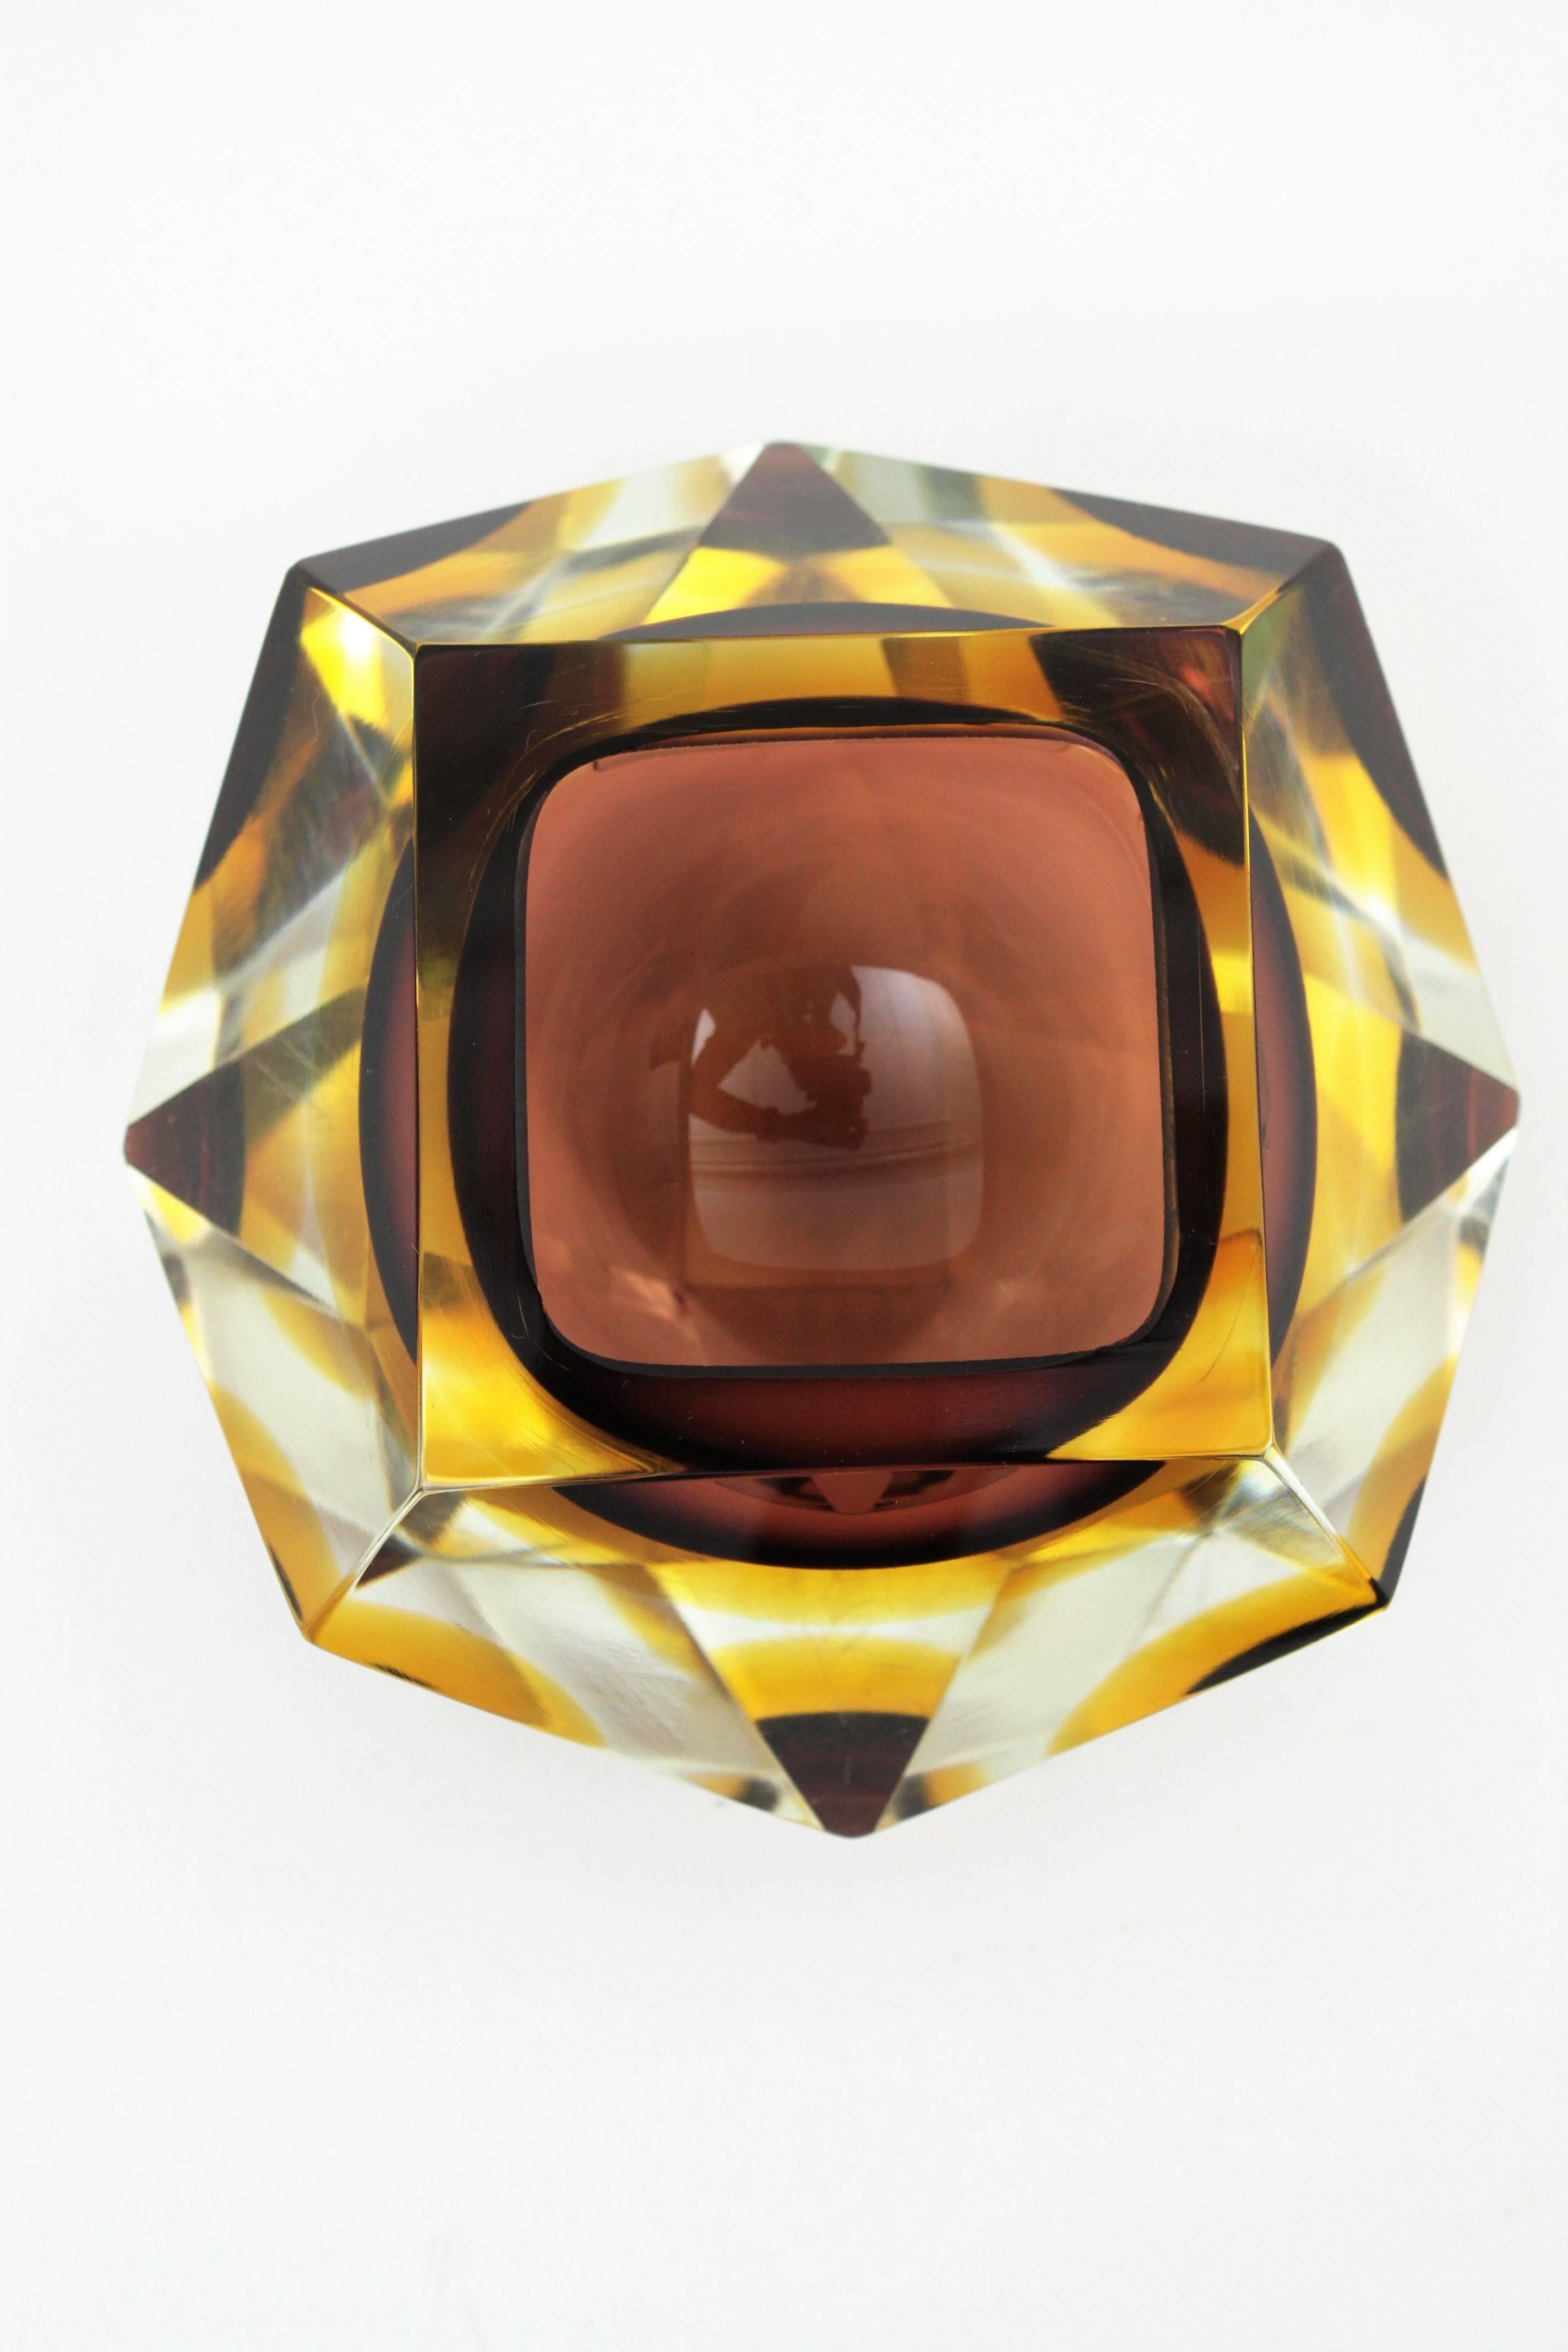 Mid-Century Modern Large Flavio Poli Brown & Amber Sommerso Diamond Shape Faceted Murano Glass Bowl